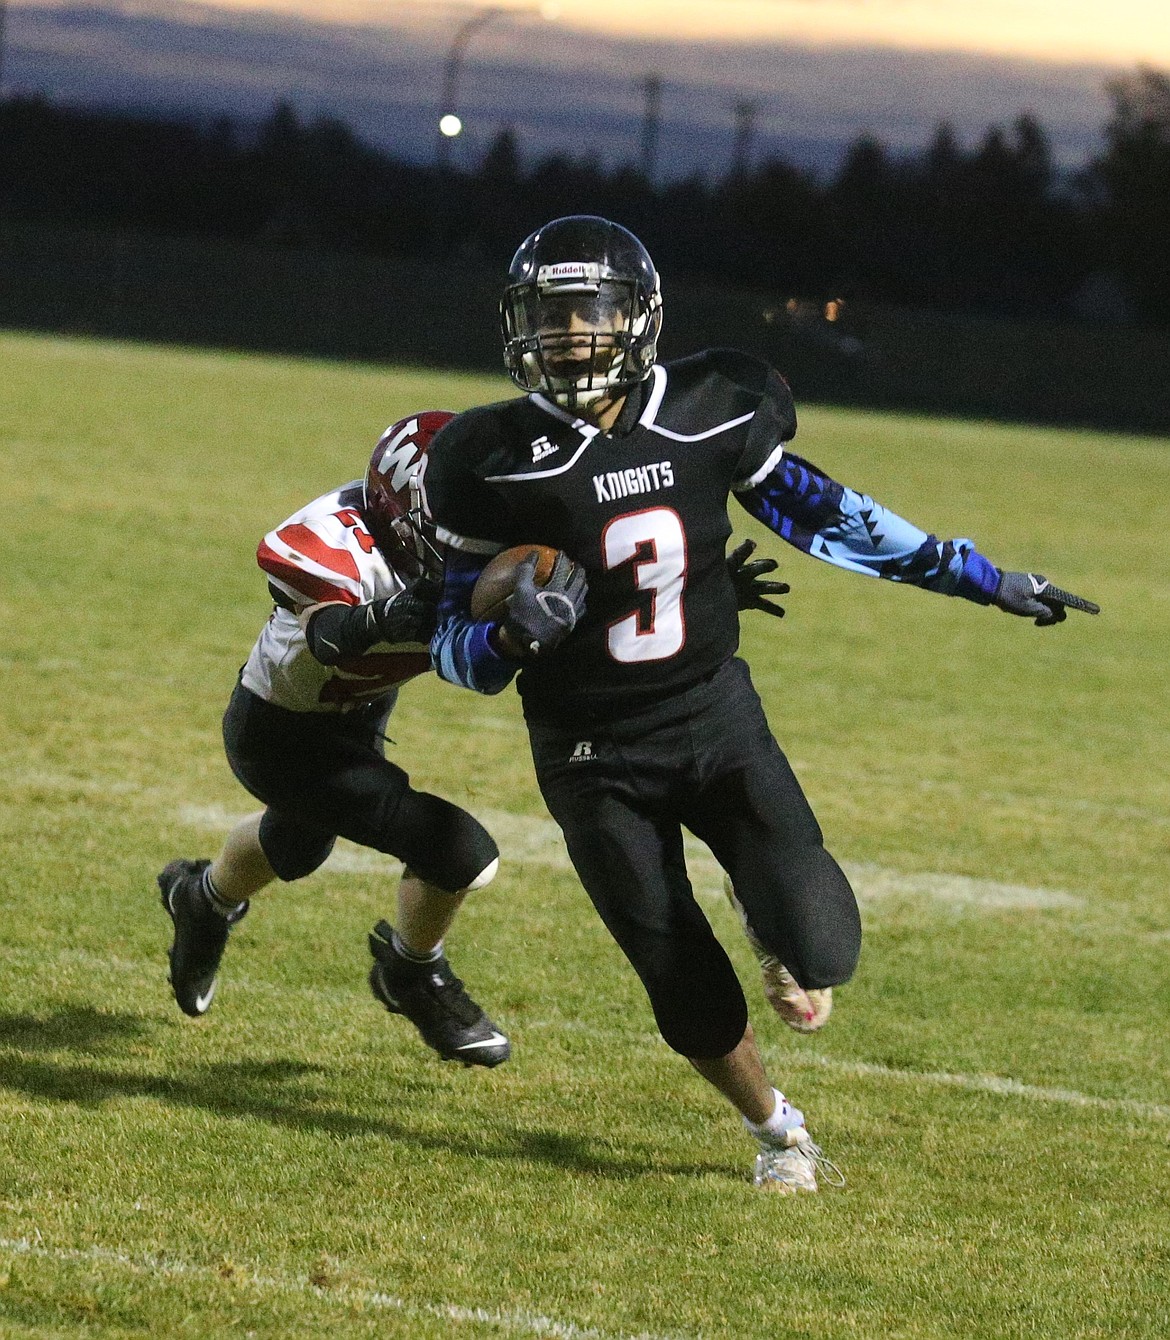 JASON ELLIOTT/Press
Lakeside wide receiver Vander Brown breaks up the field on a 25-yard touchdown pass during the Scenic Idaho Conference tiebreaker at Post Falls High.